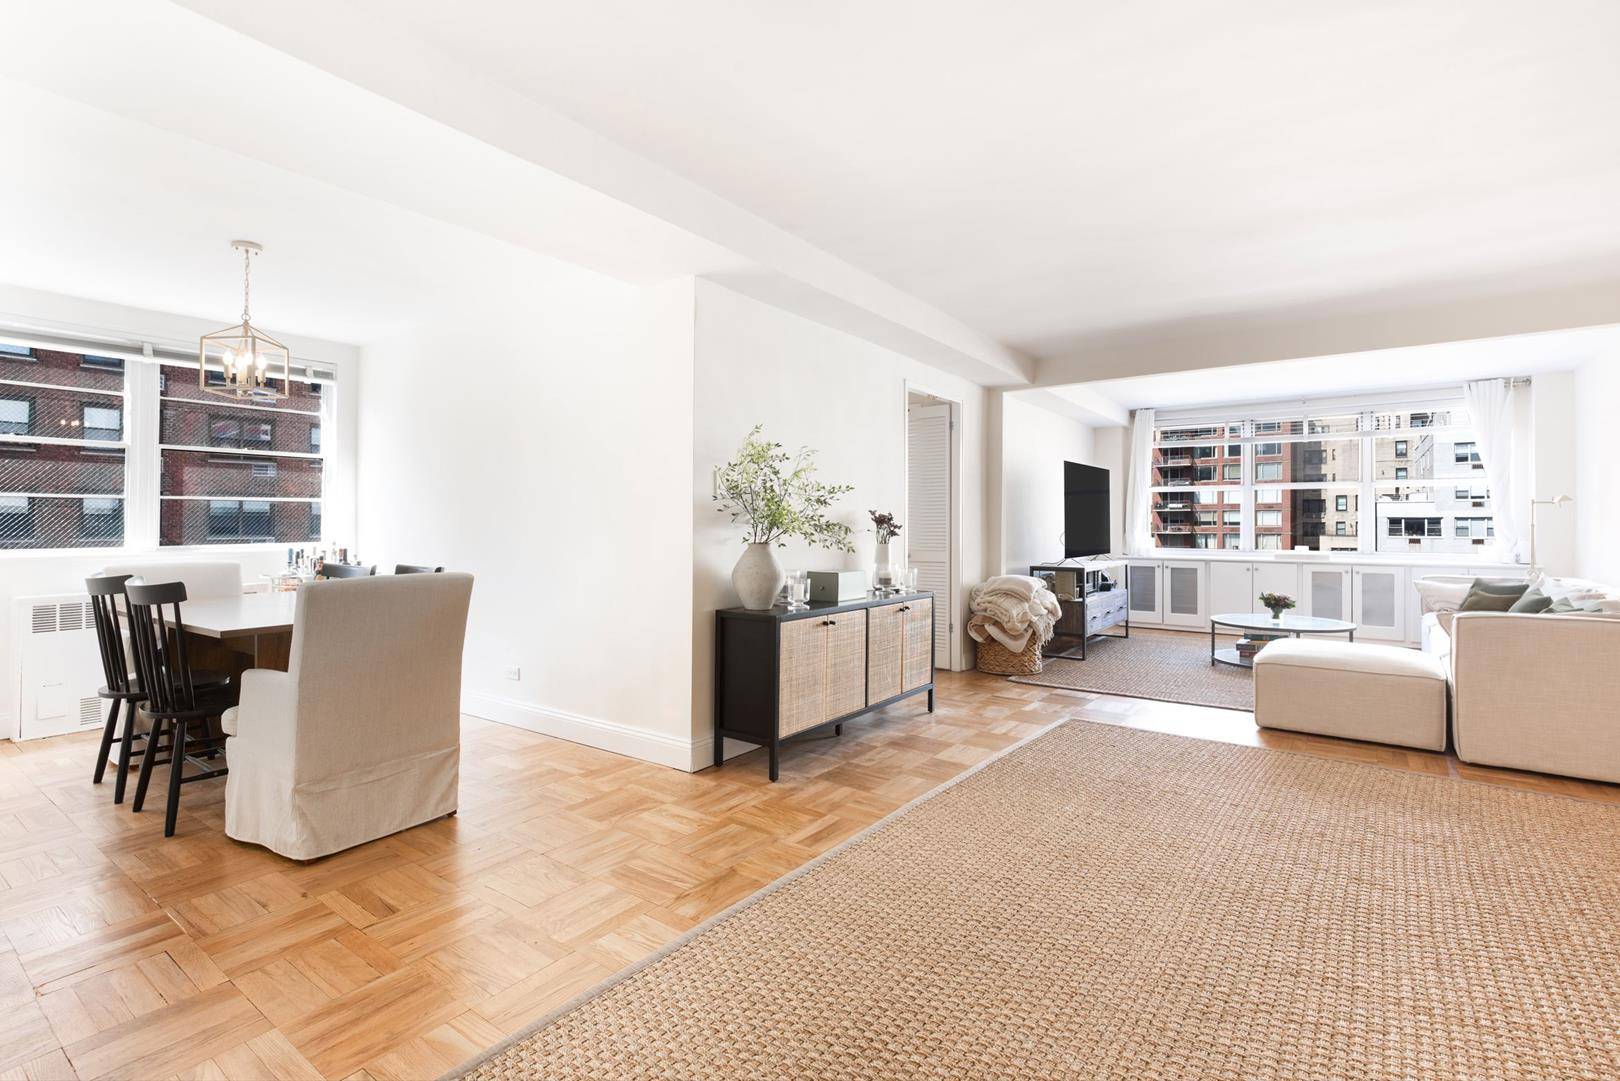 BRIGHT amp ; AIRY Apartment 10J at 315 East 70th Street a corner unit with a flexible layout, conveniently located in a fantastic building in the heart of Lenox Hill ...